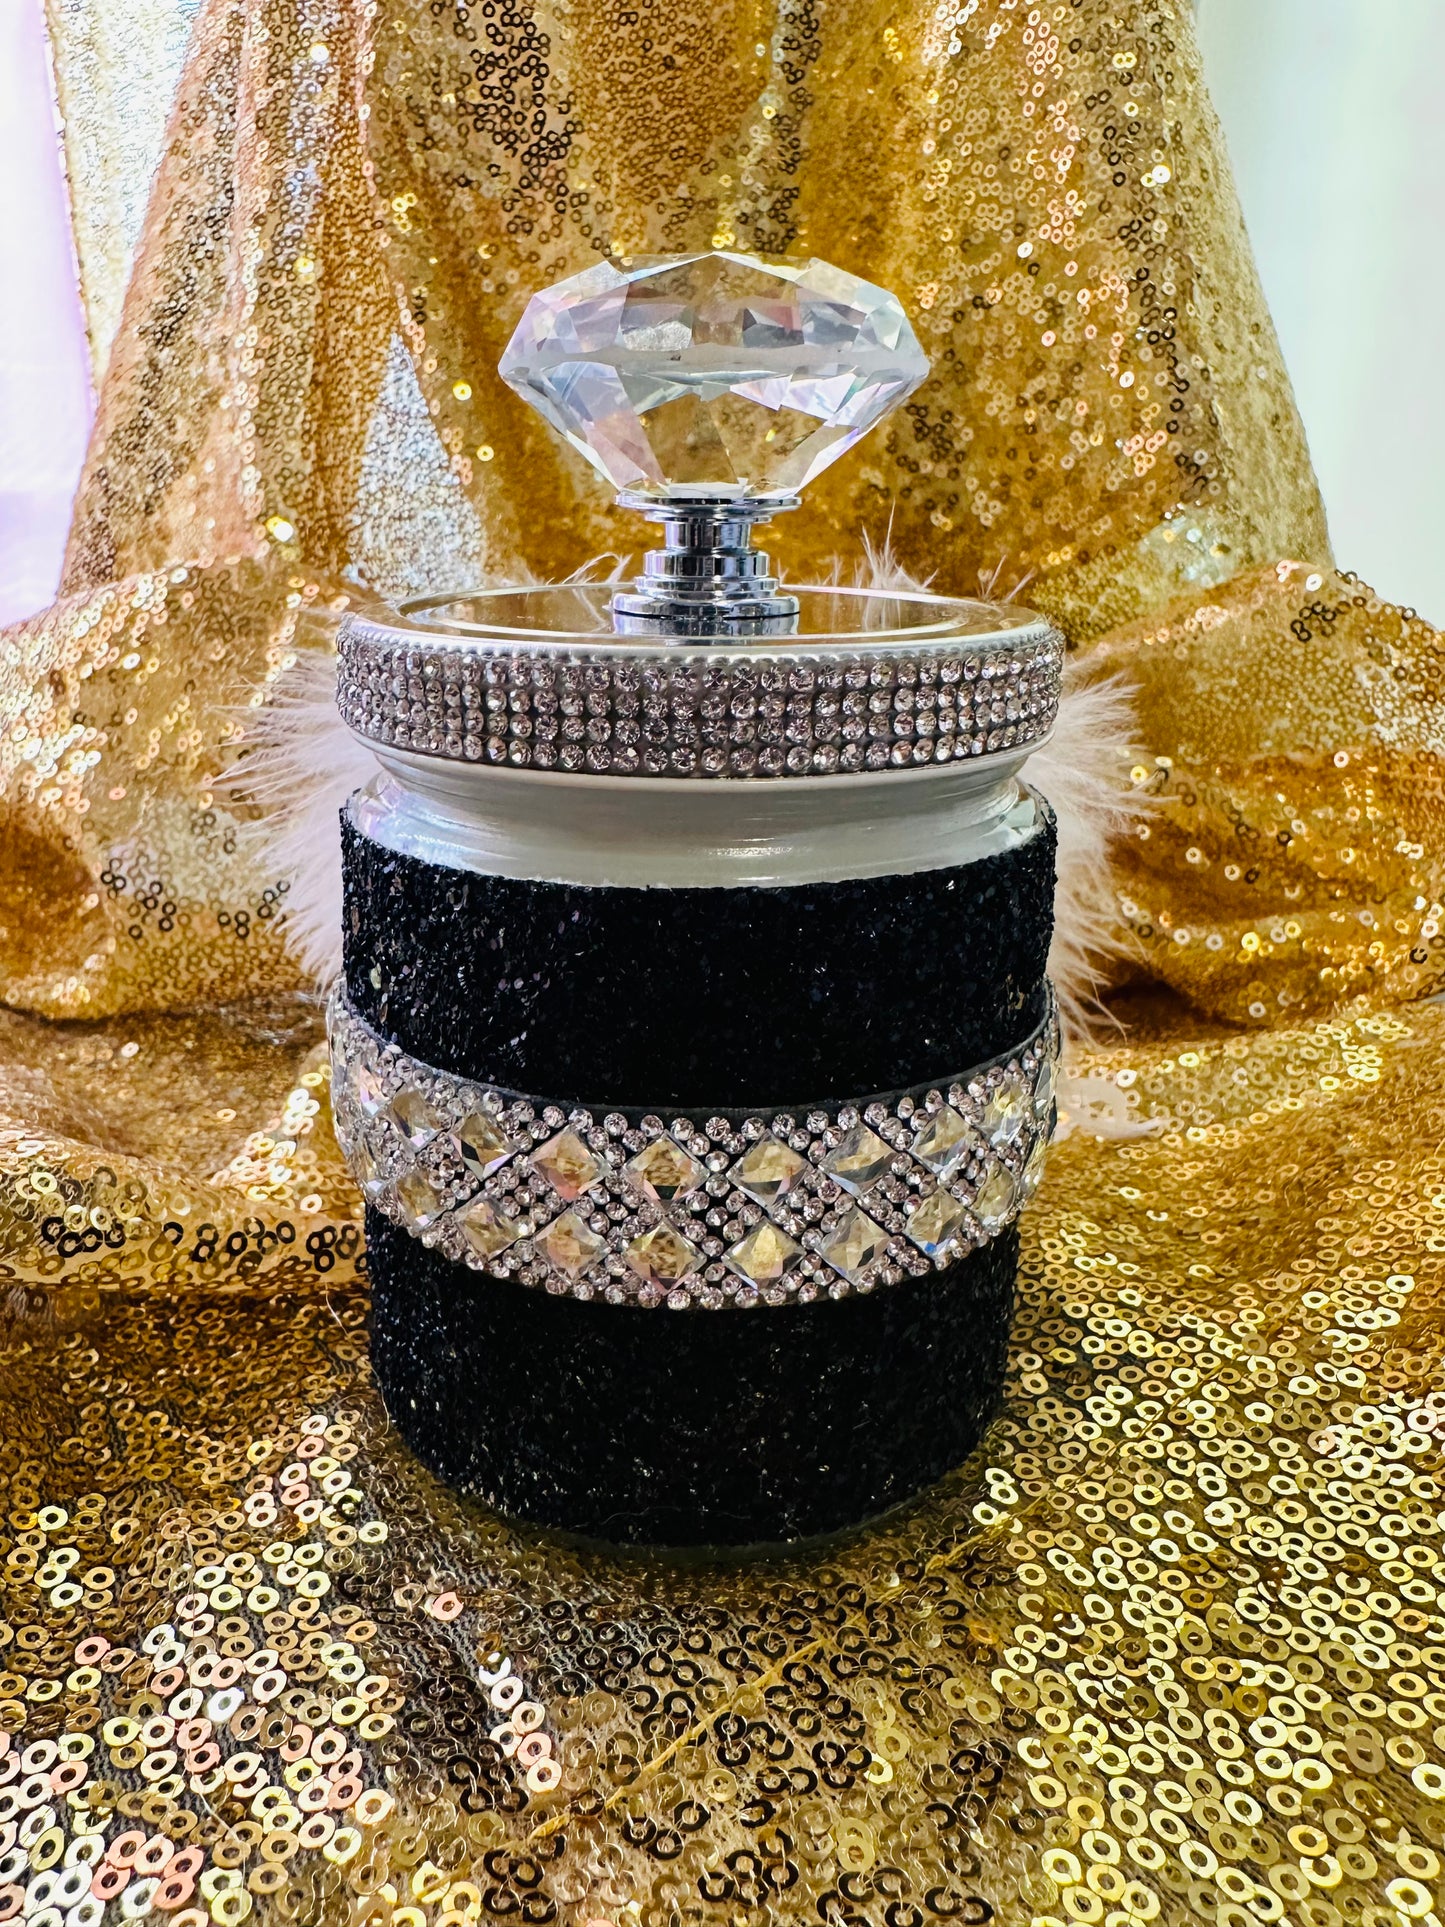 The Royal Diva Luxury Candle